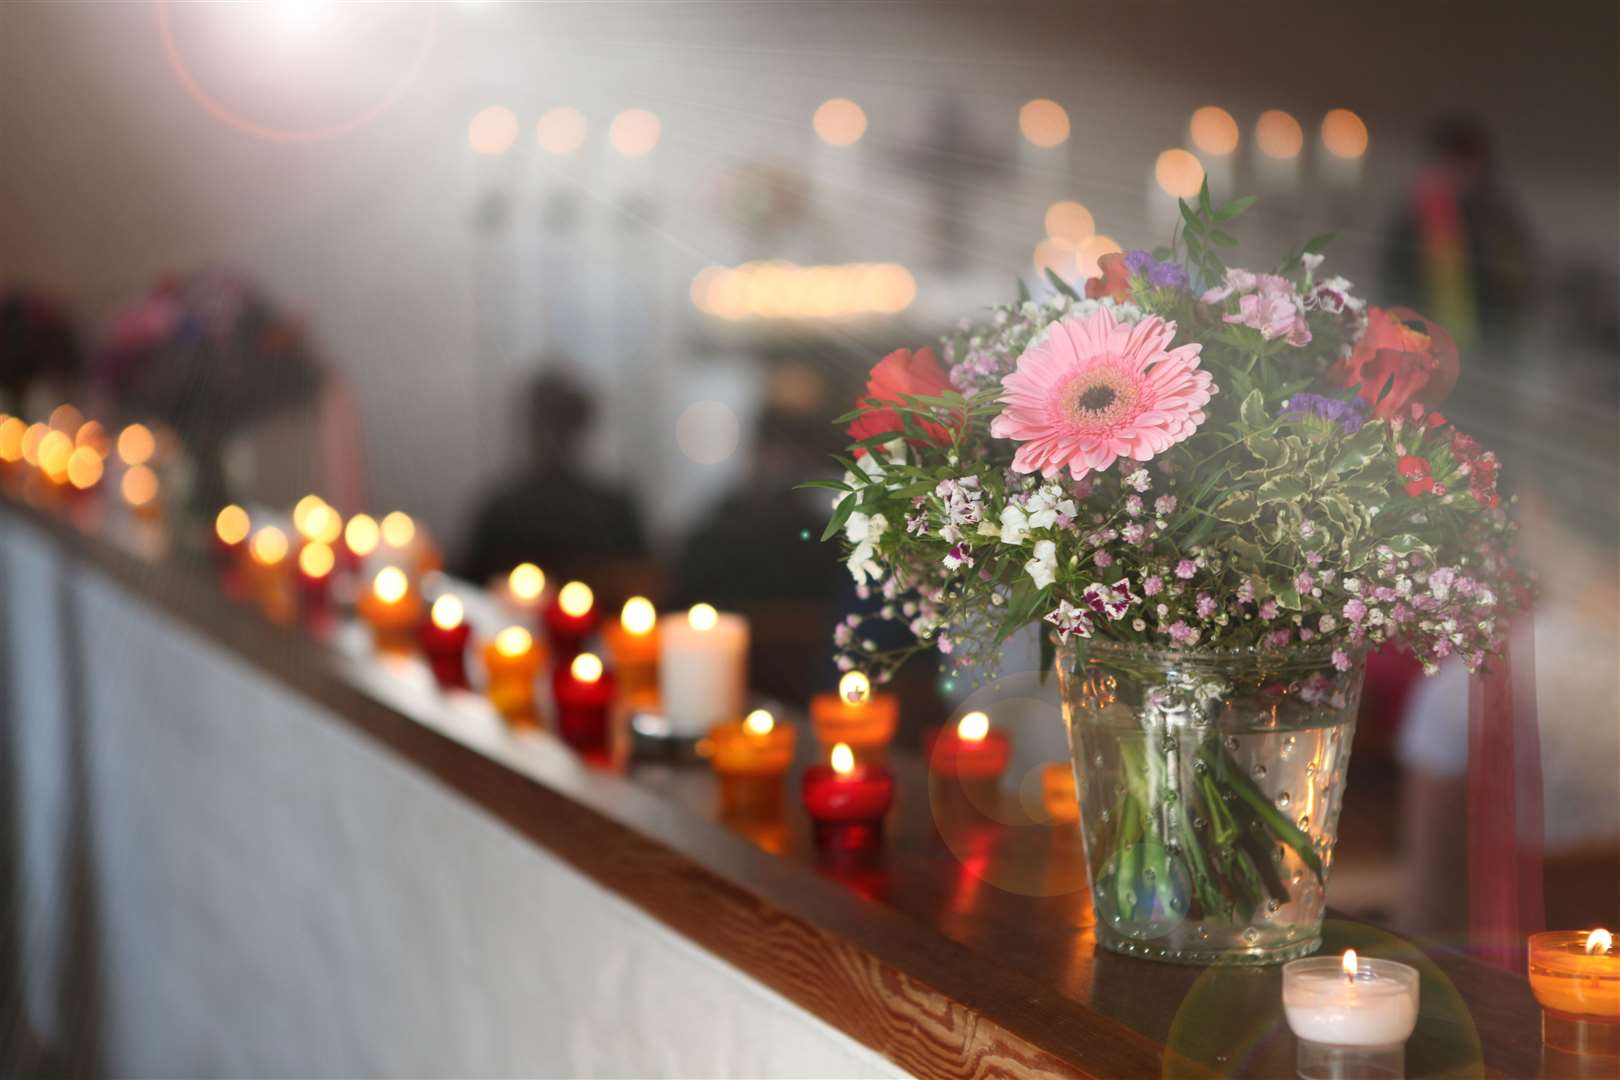 Funerals will always be emotional occasions, but they do not have to be solemn occasions.